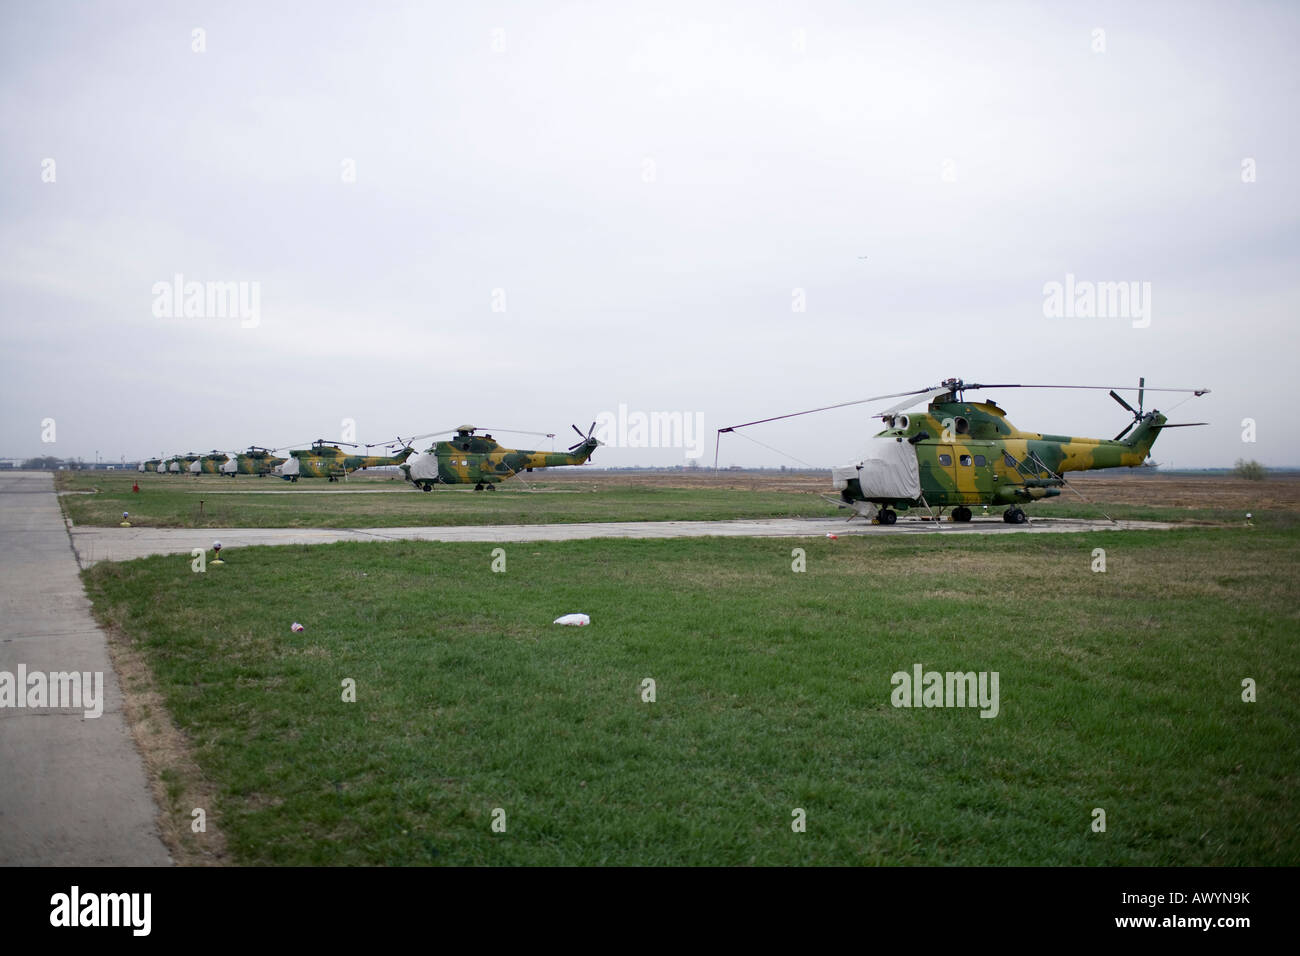 military helicopters parked near the runway Stock Photo